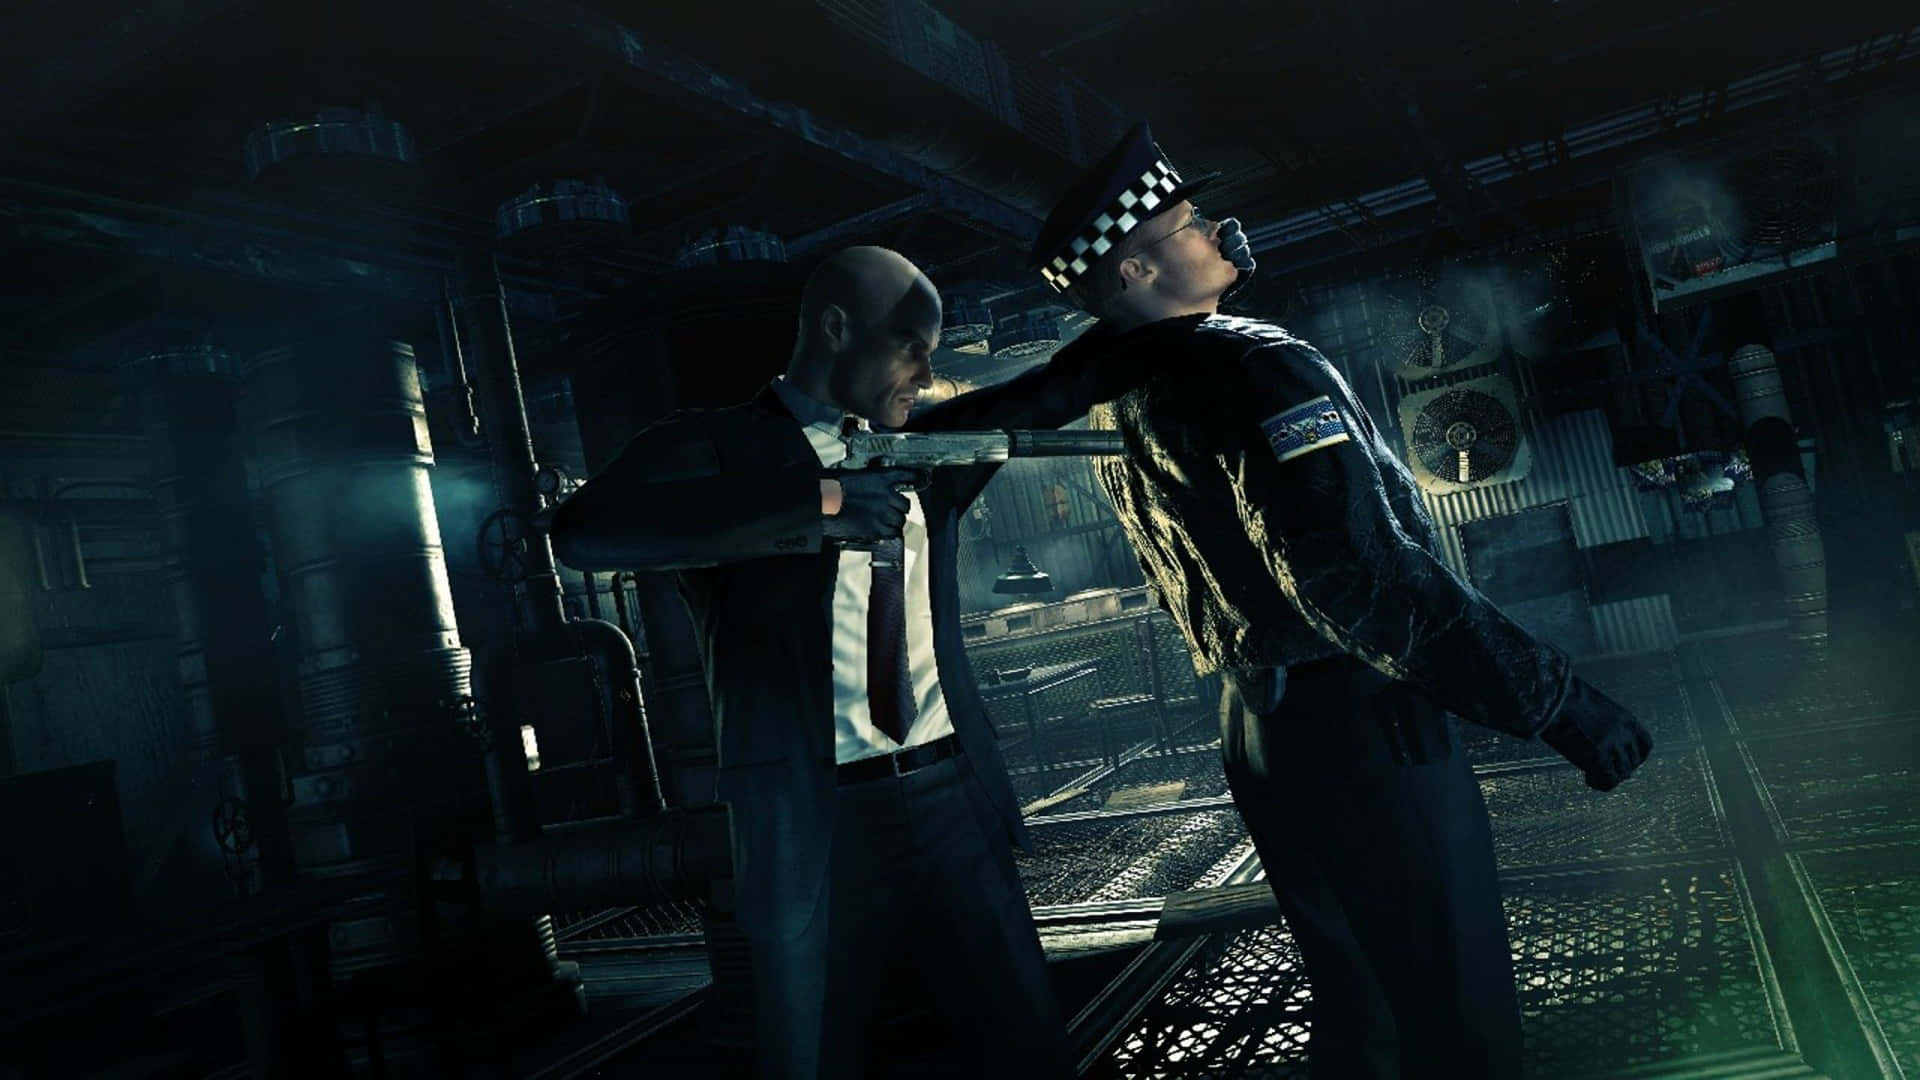 Play as Agent 47 in Hitman Absolution